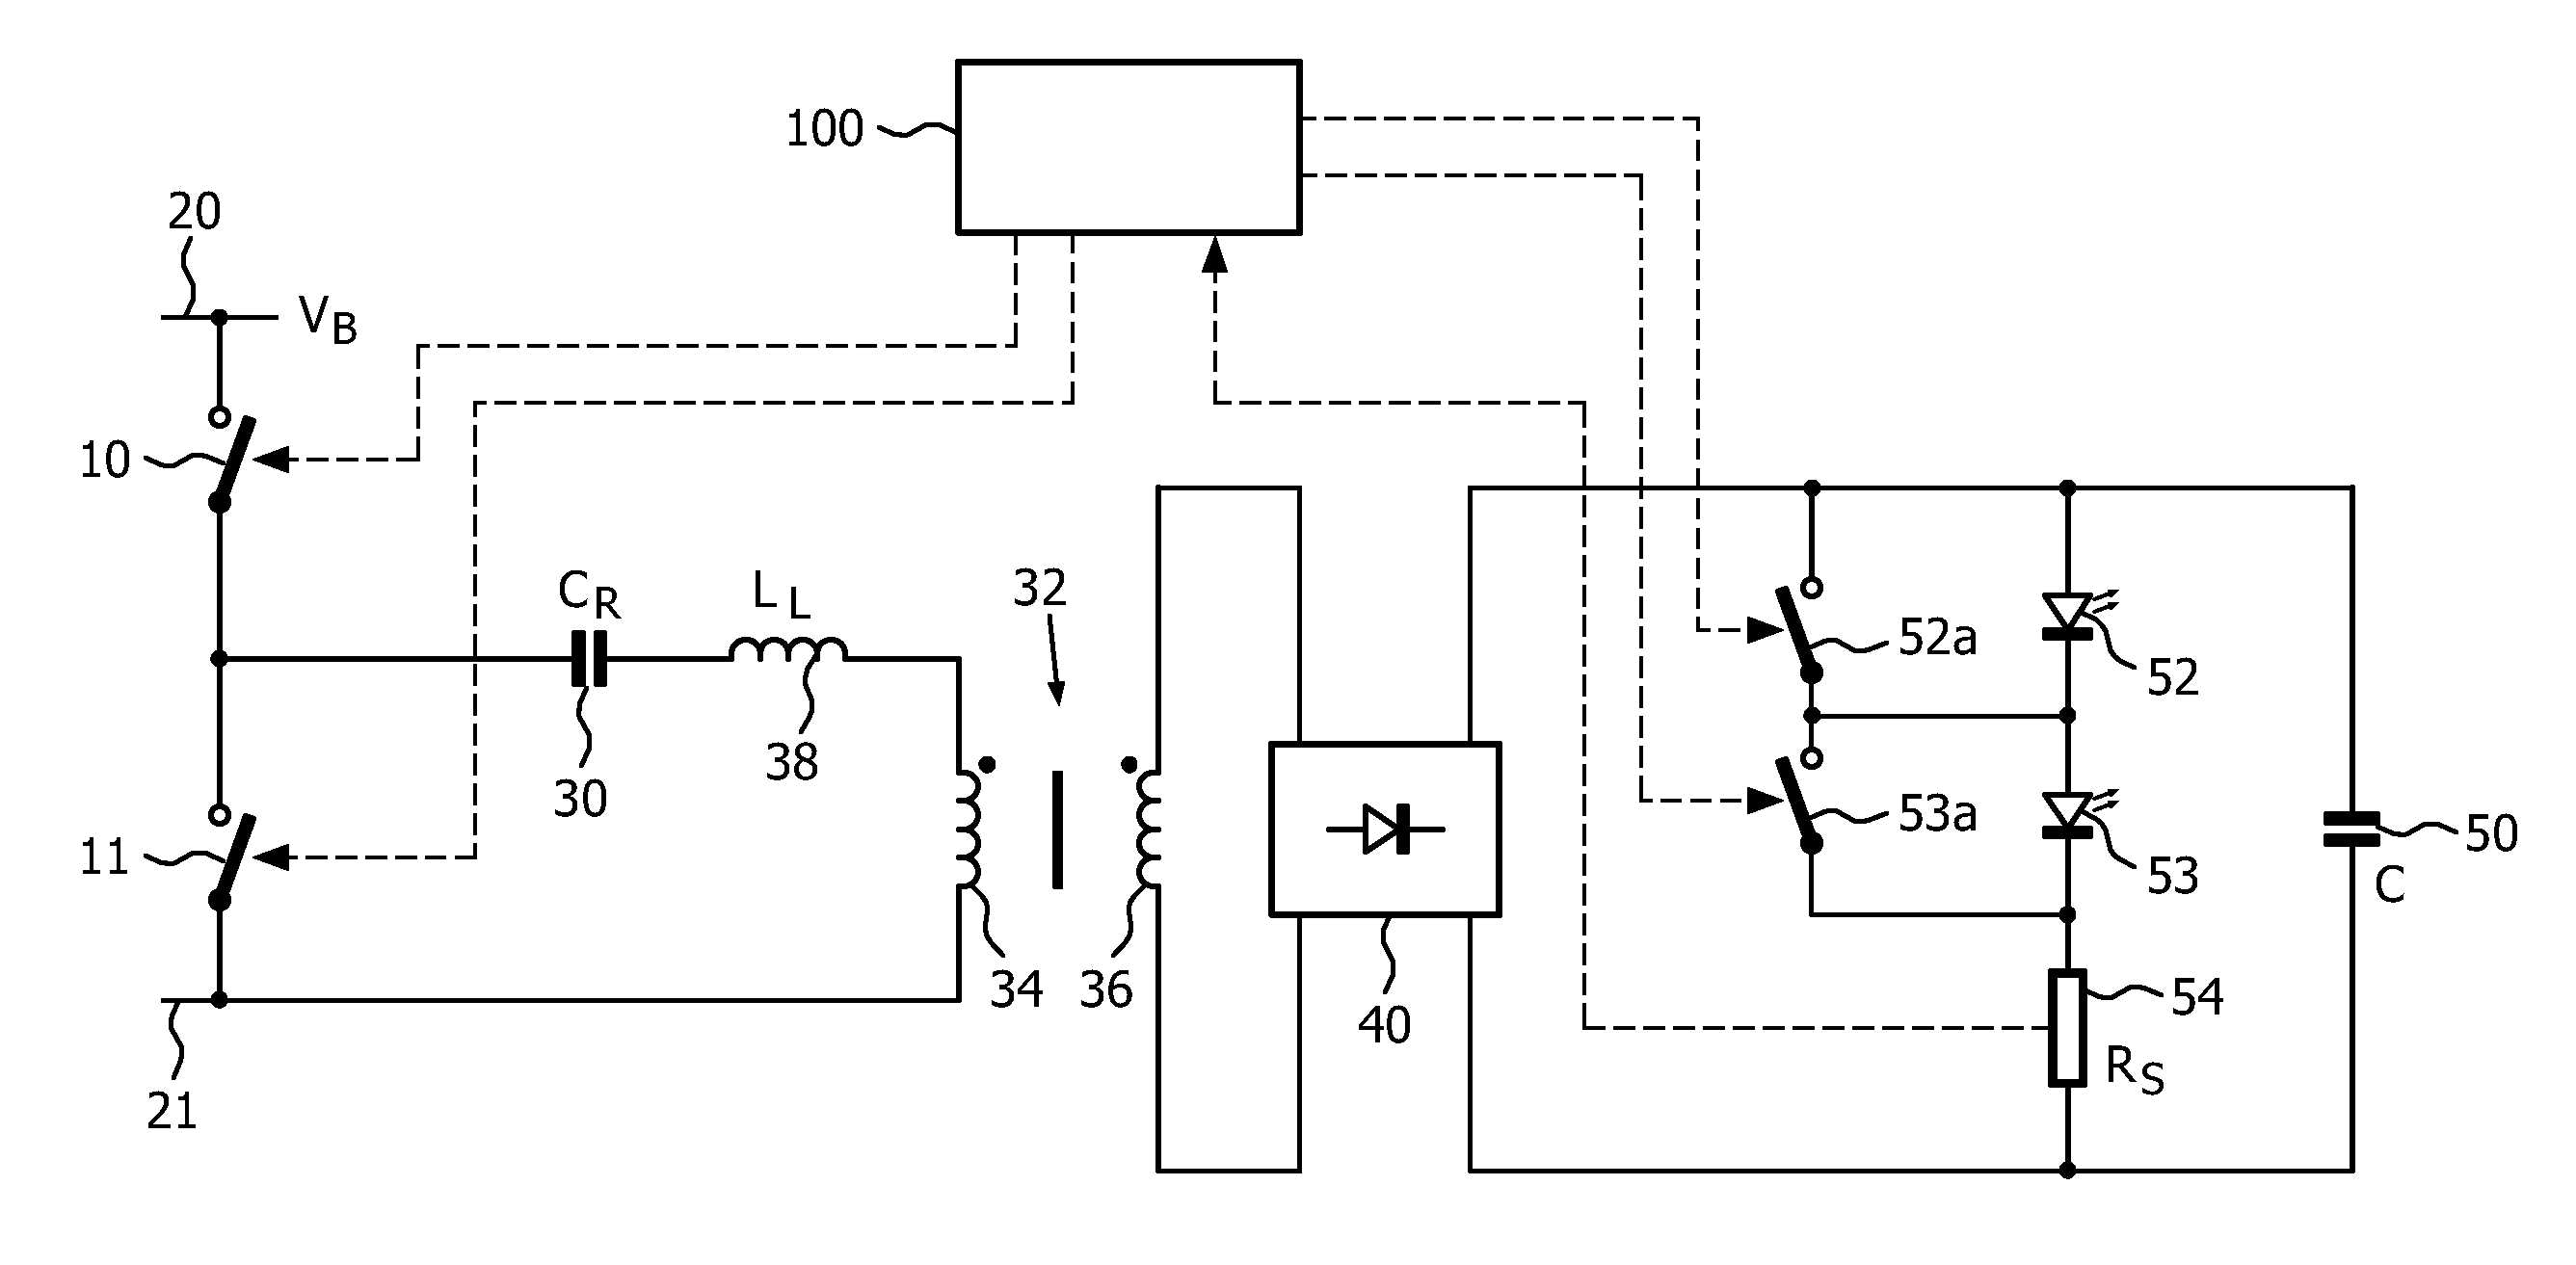 Dimming of LED driver